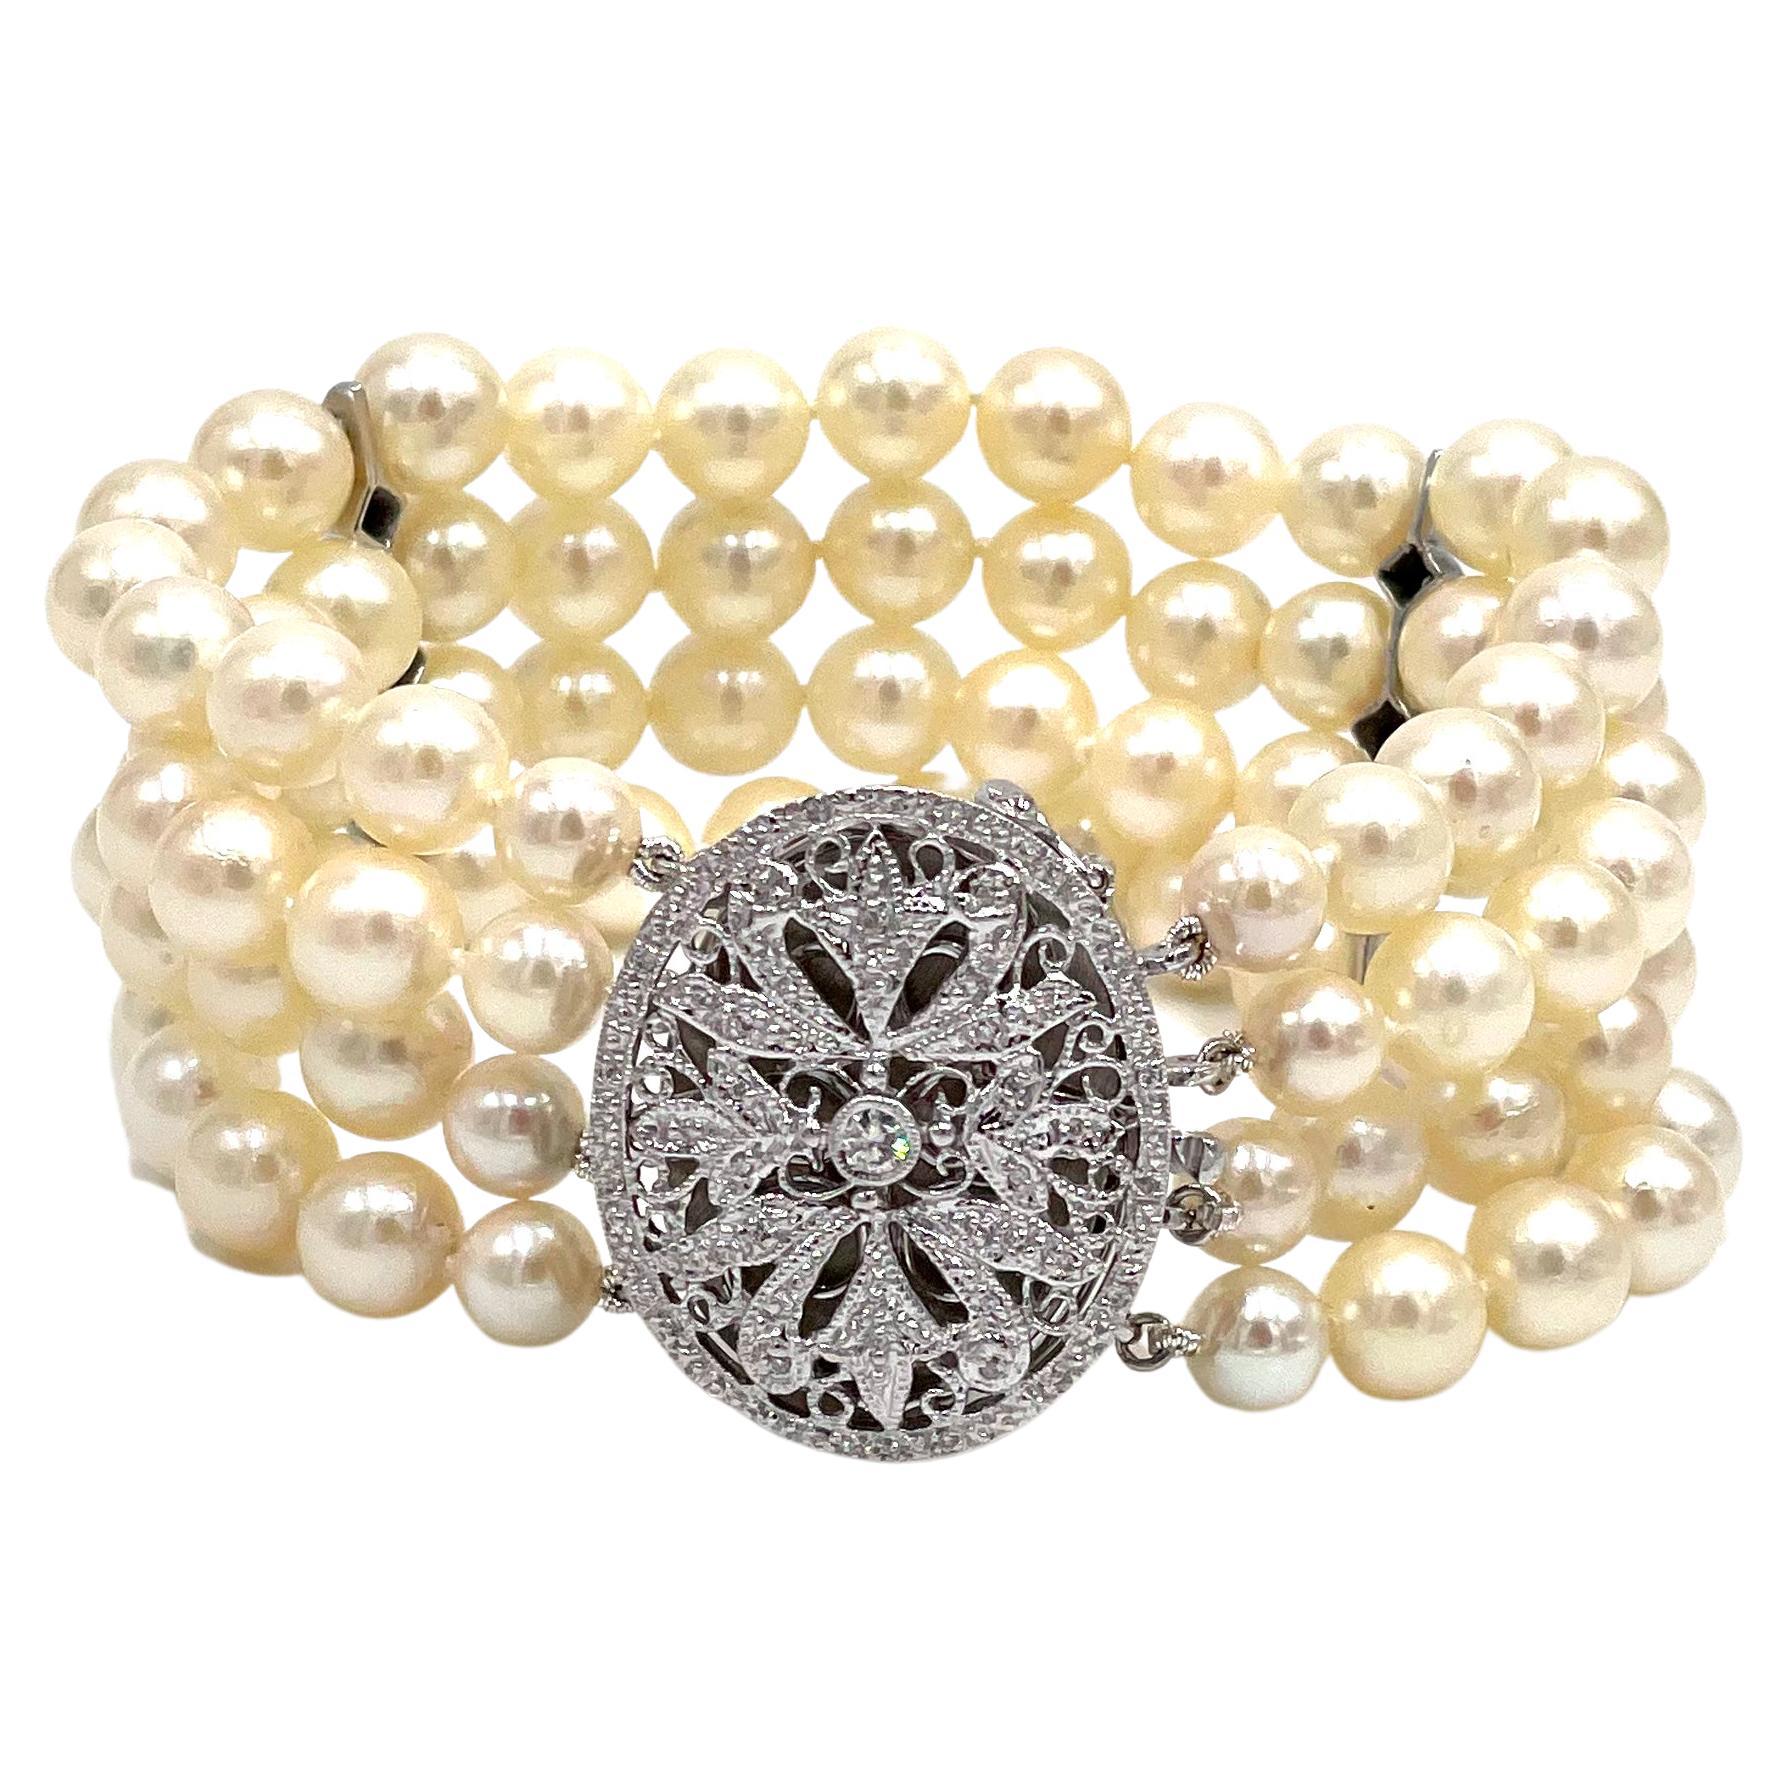 Four Row Cultured Pearl Bracelet, 14K White Gold Antique Inspired Diamond Clasp